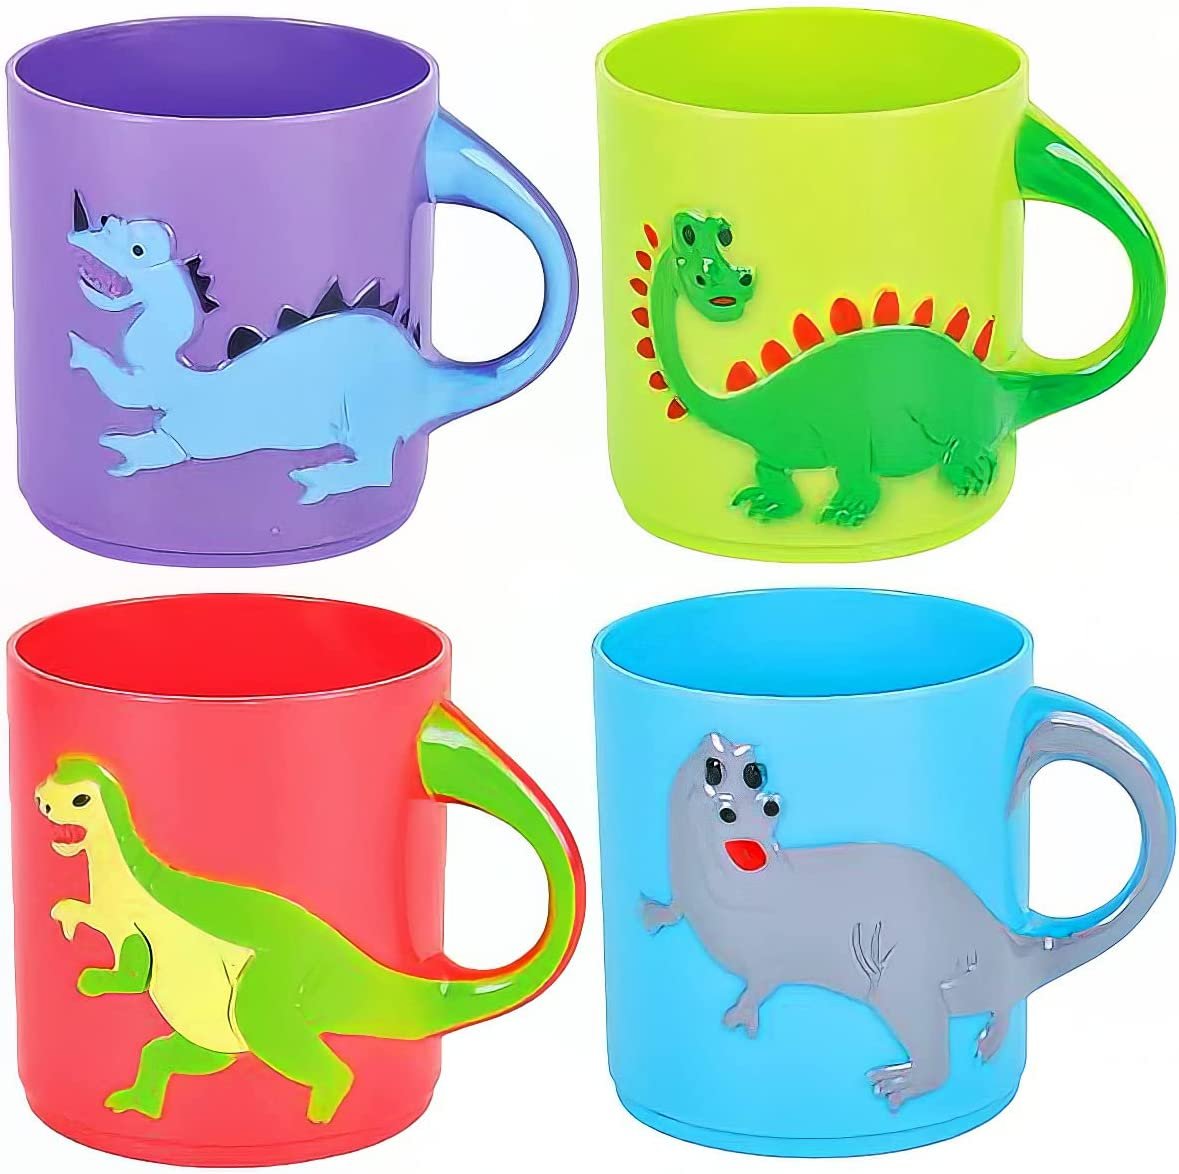 Dinosaur Mugs for Kids, Plastic Dino Cups, Set of 4 - Assorted Colors & Designs